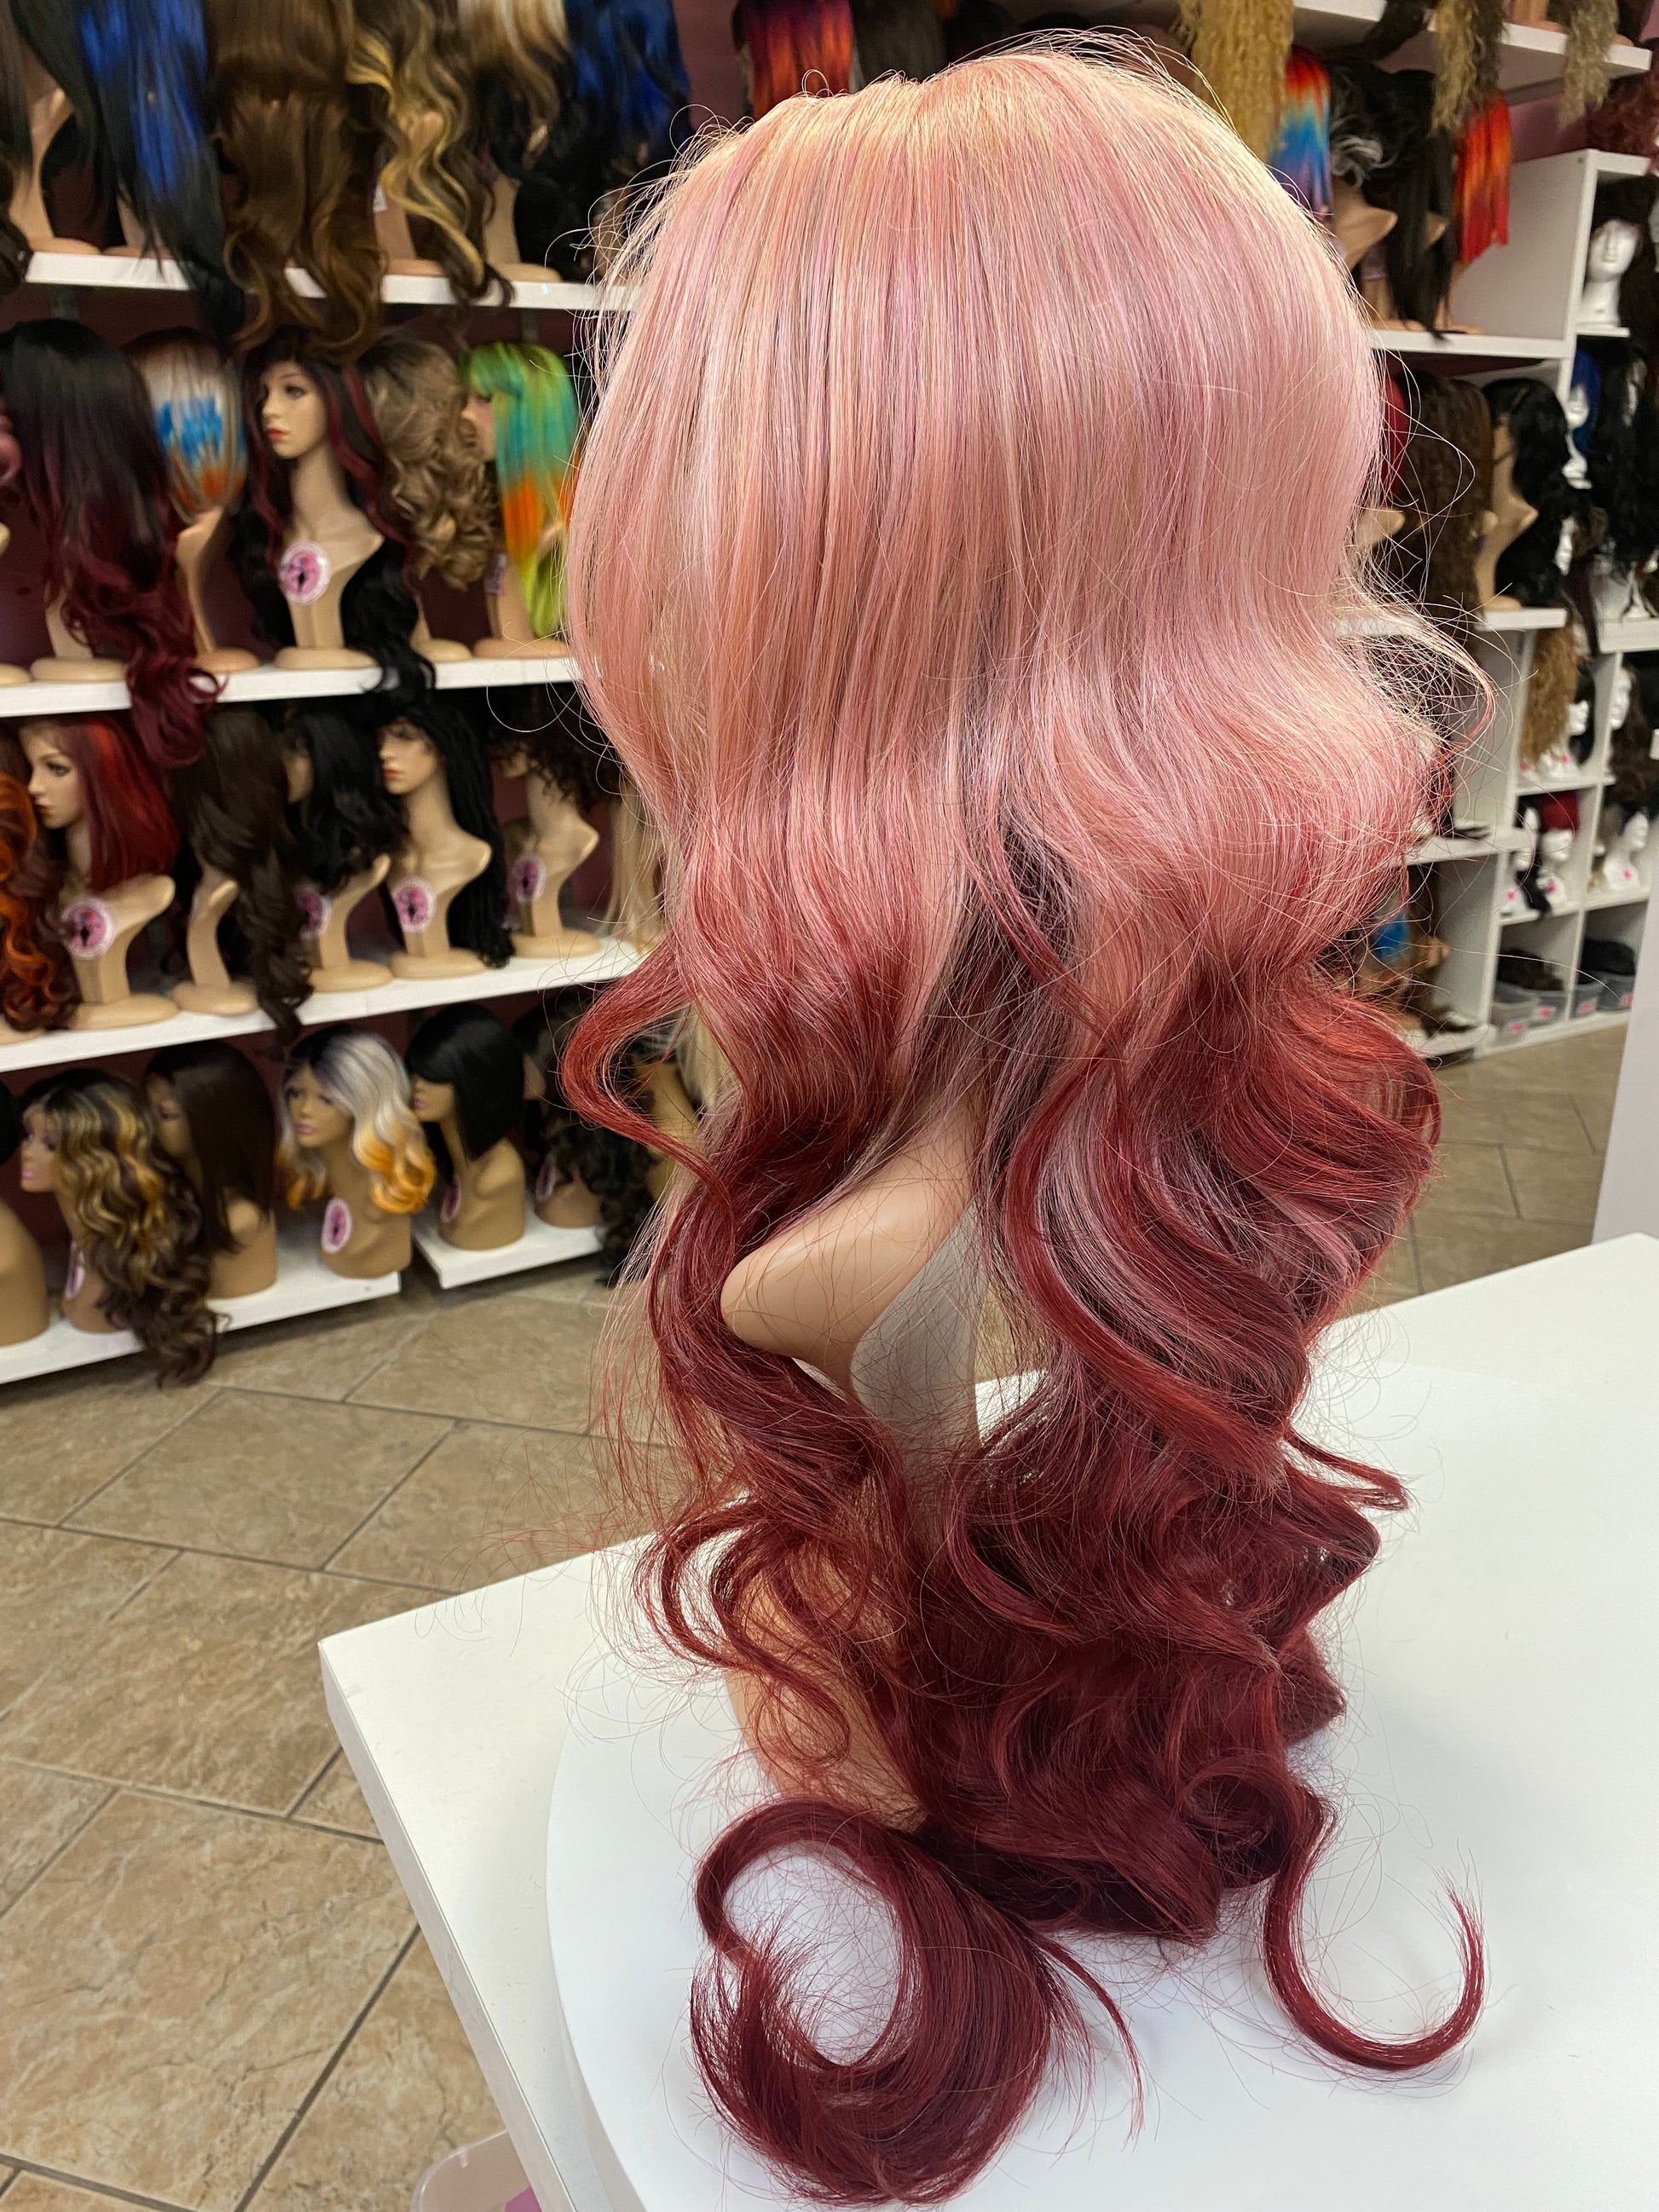 46 Tess - 13x4 Free Part Wig - PINK TO RED - DaizyKat Cosmetics 46 Tess - 13x4 Free Part Wig - PINK TO RED DaizyKat Cosmetics Wigs